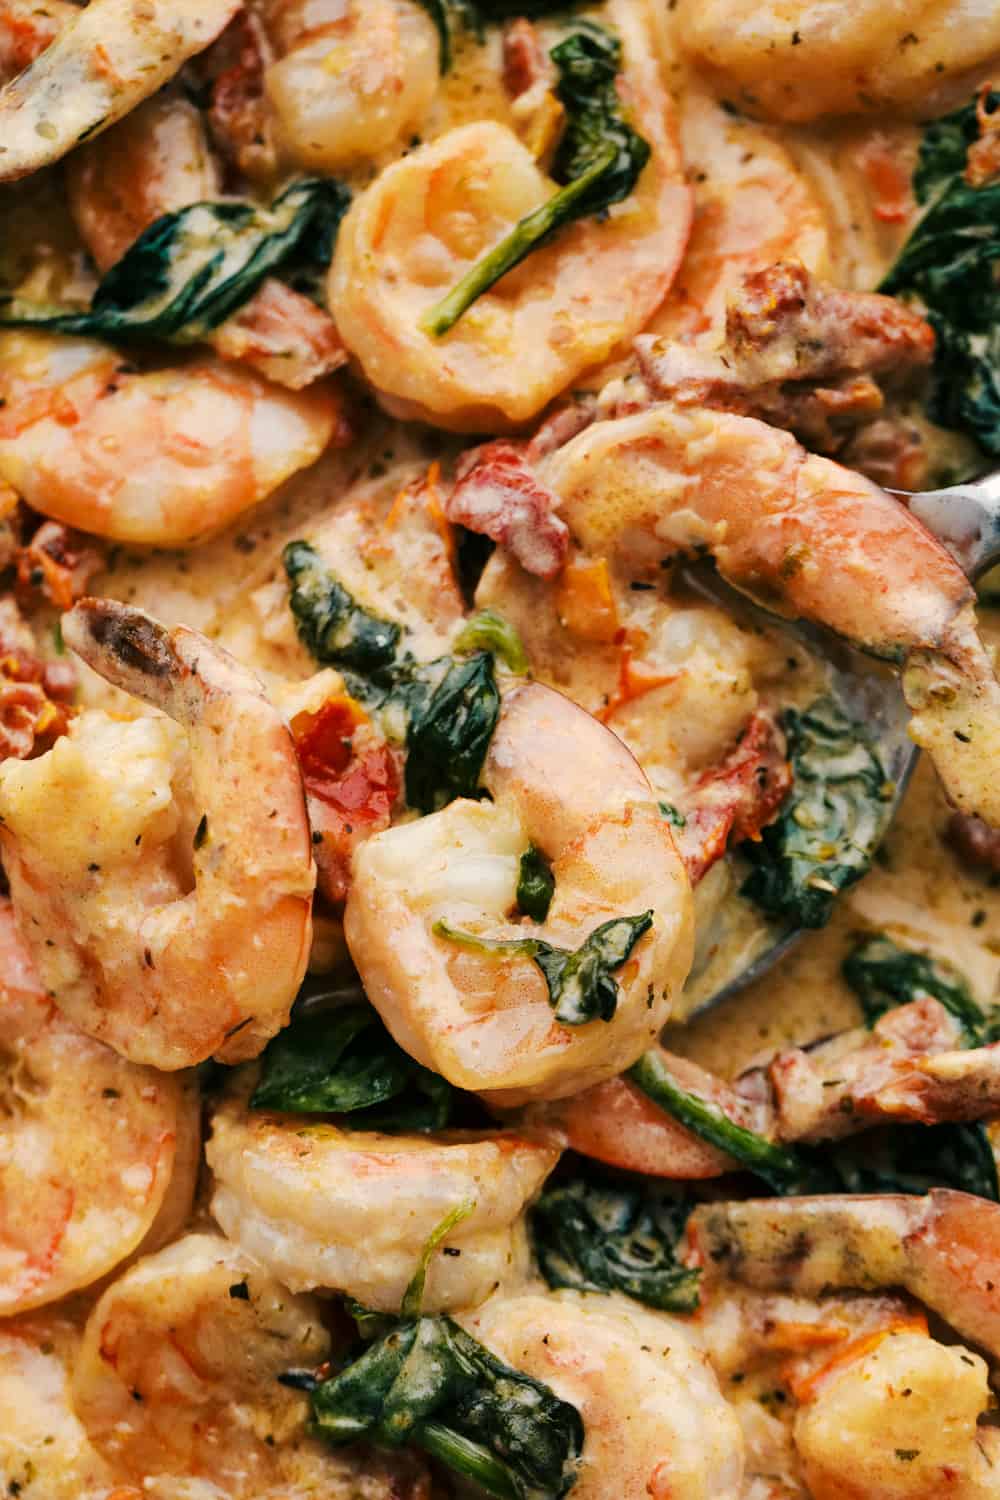 Upclose picture to see the creamy tuscan garlic shrimp and the incredible texture. 